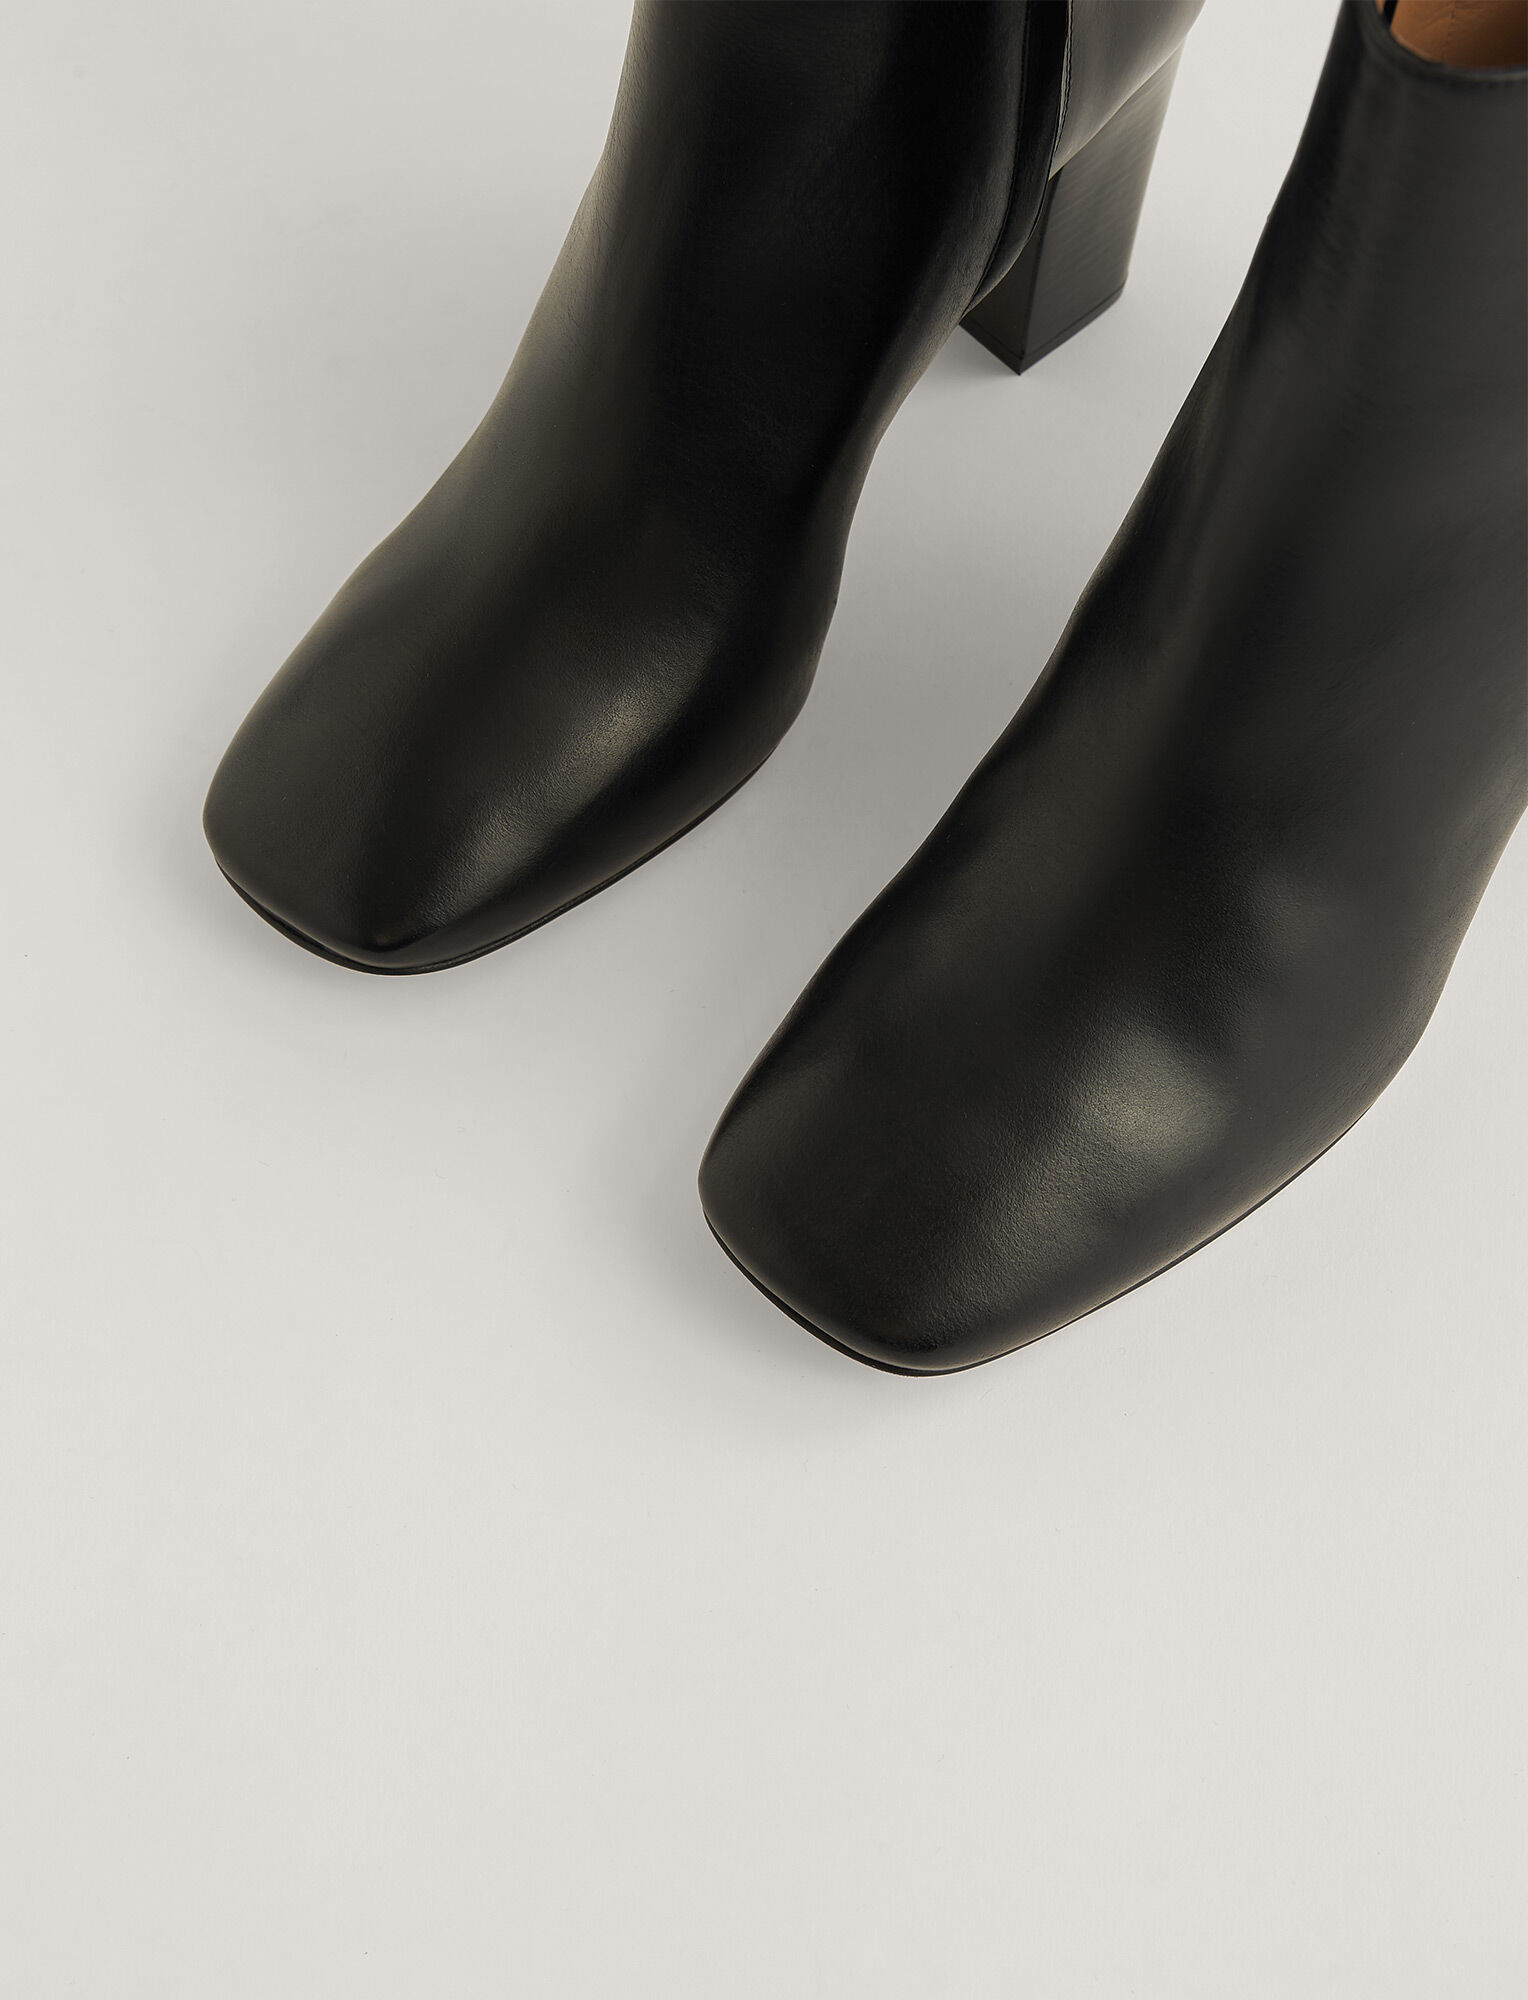 Joseph, Square Heel Ankle Boots, in Black